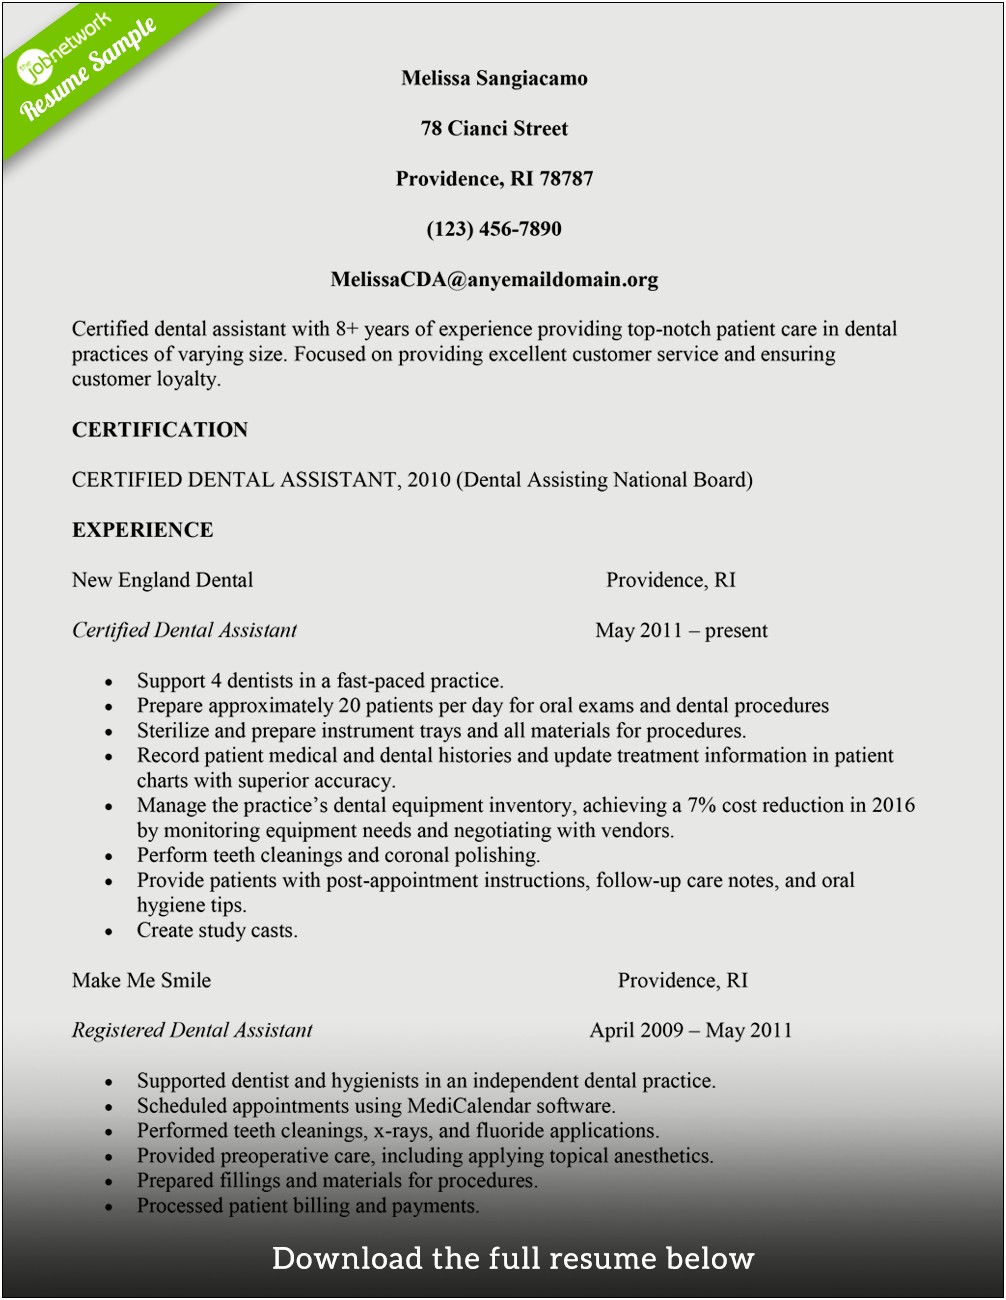 Medical Assistant Resume With No Externship Experience